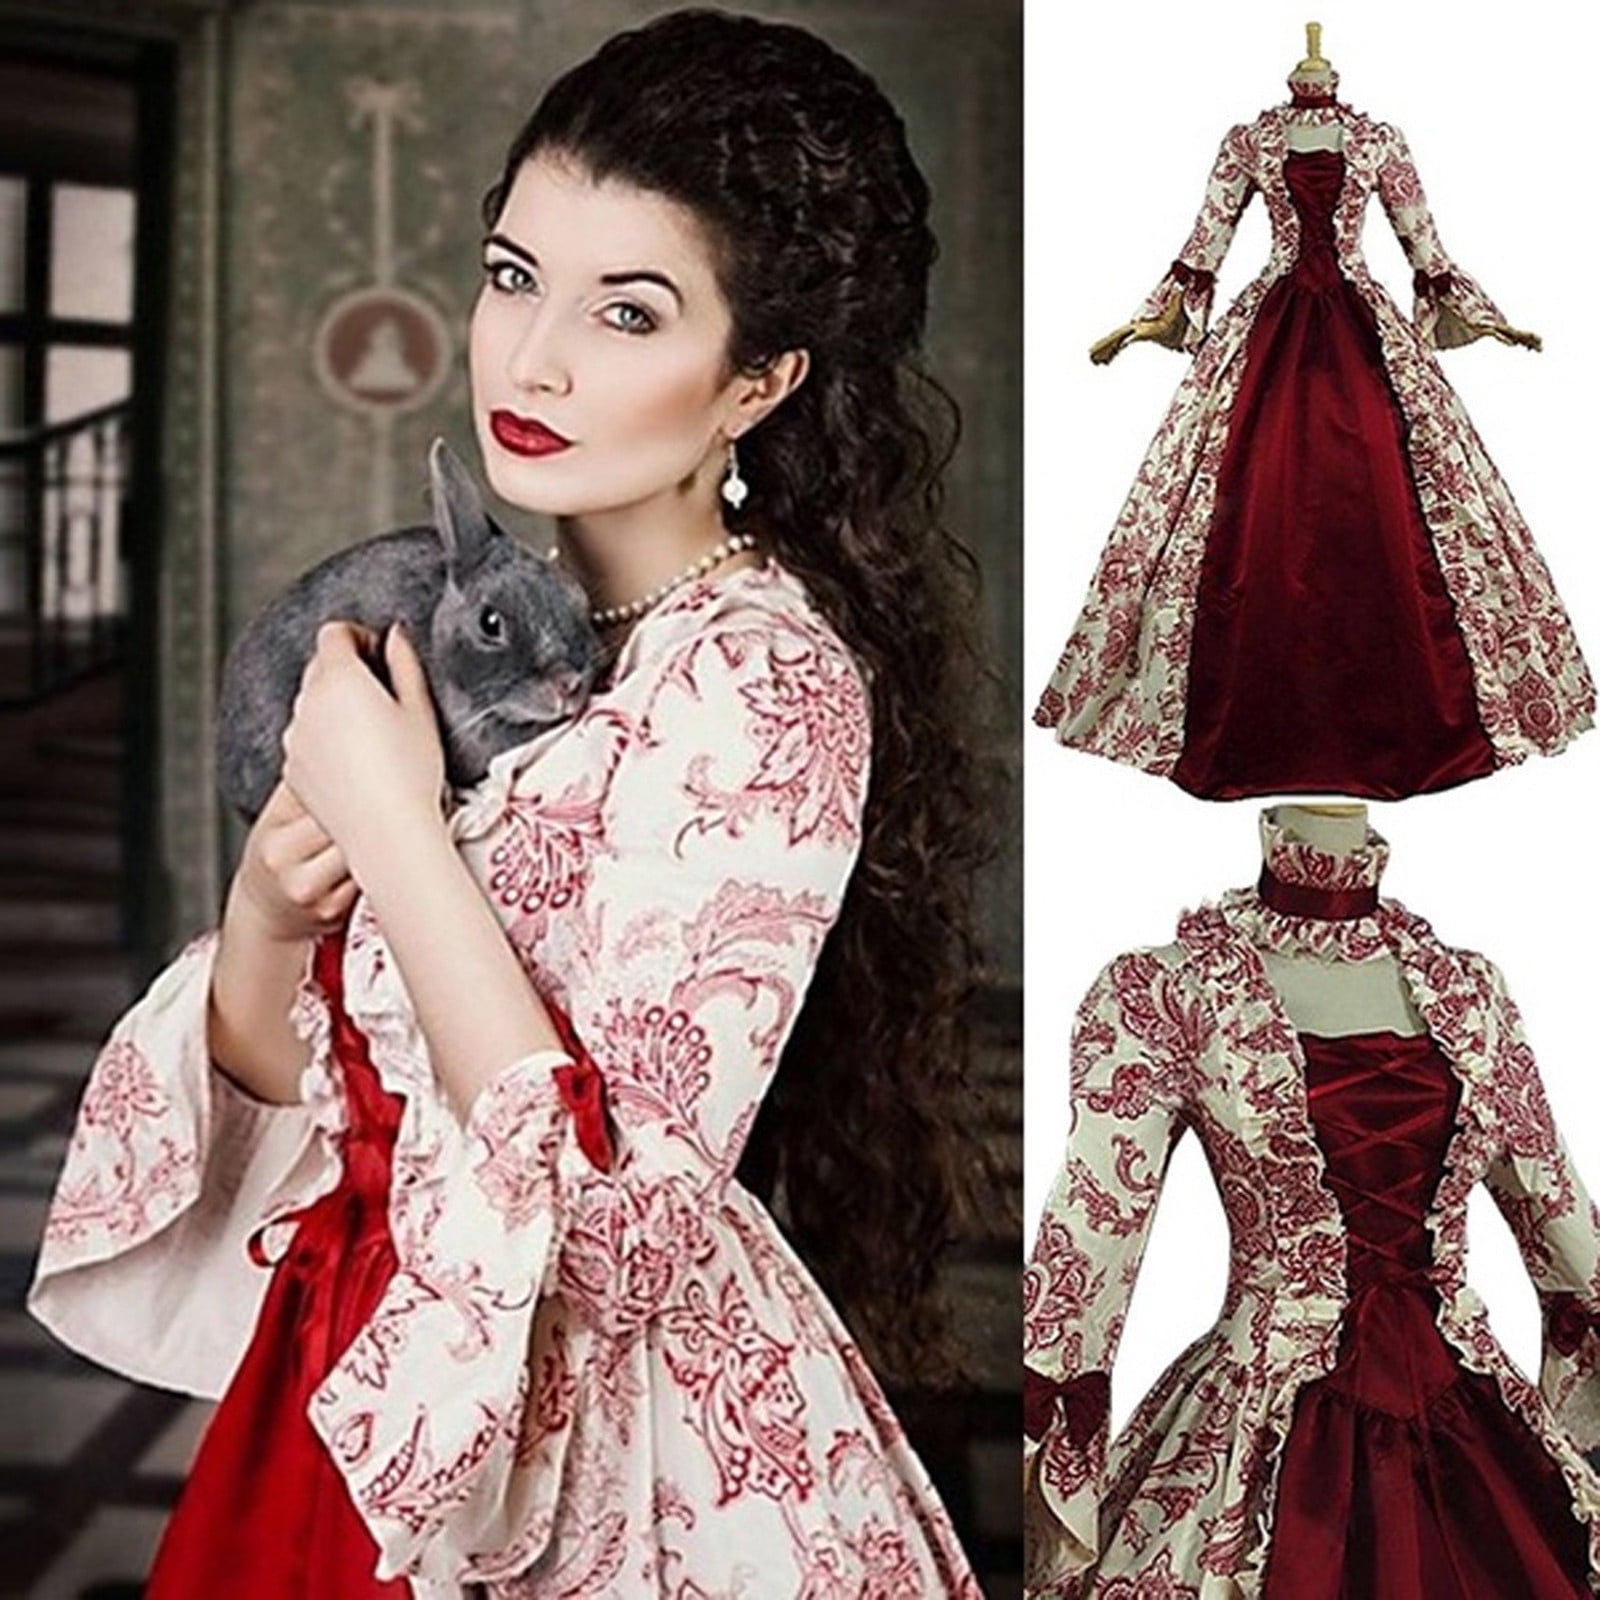 Ball Gown Victorian Dress | My Steampunk Style – my-steampunk-style